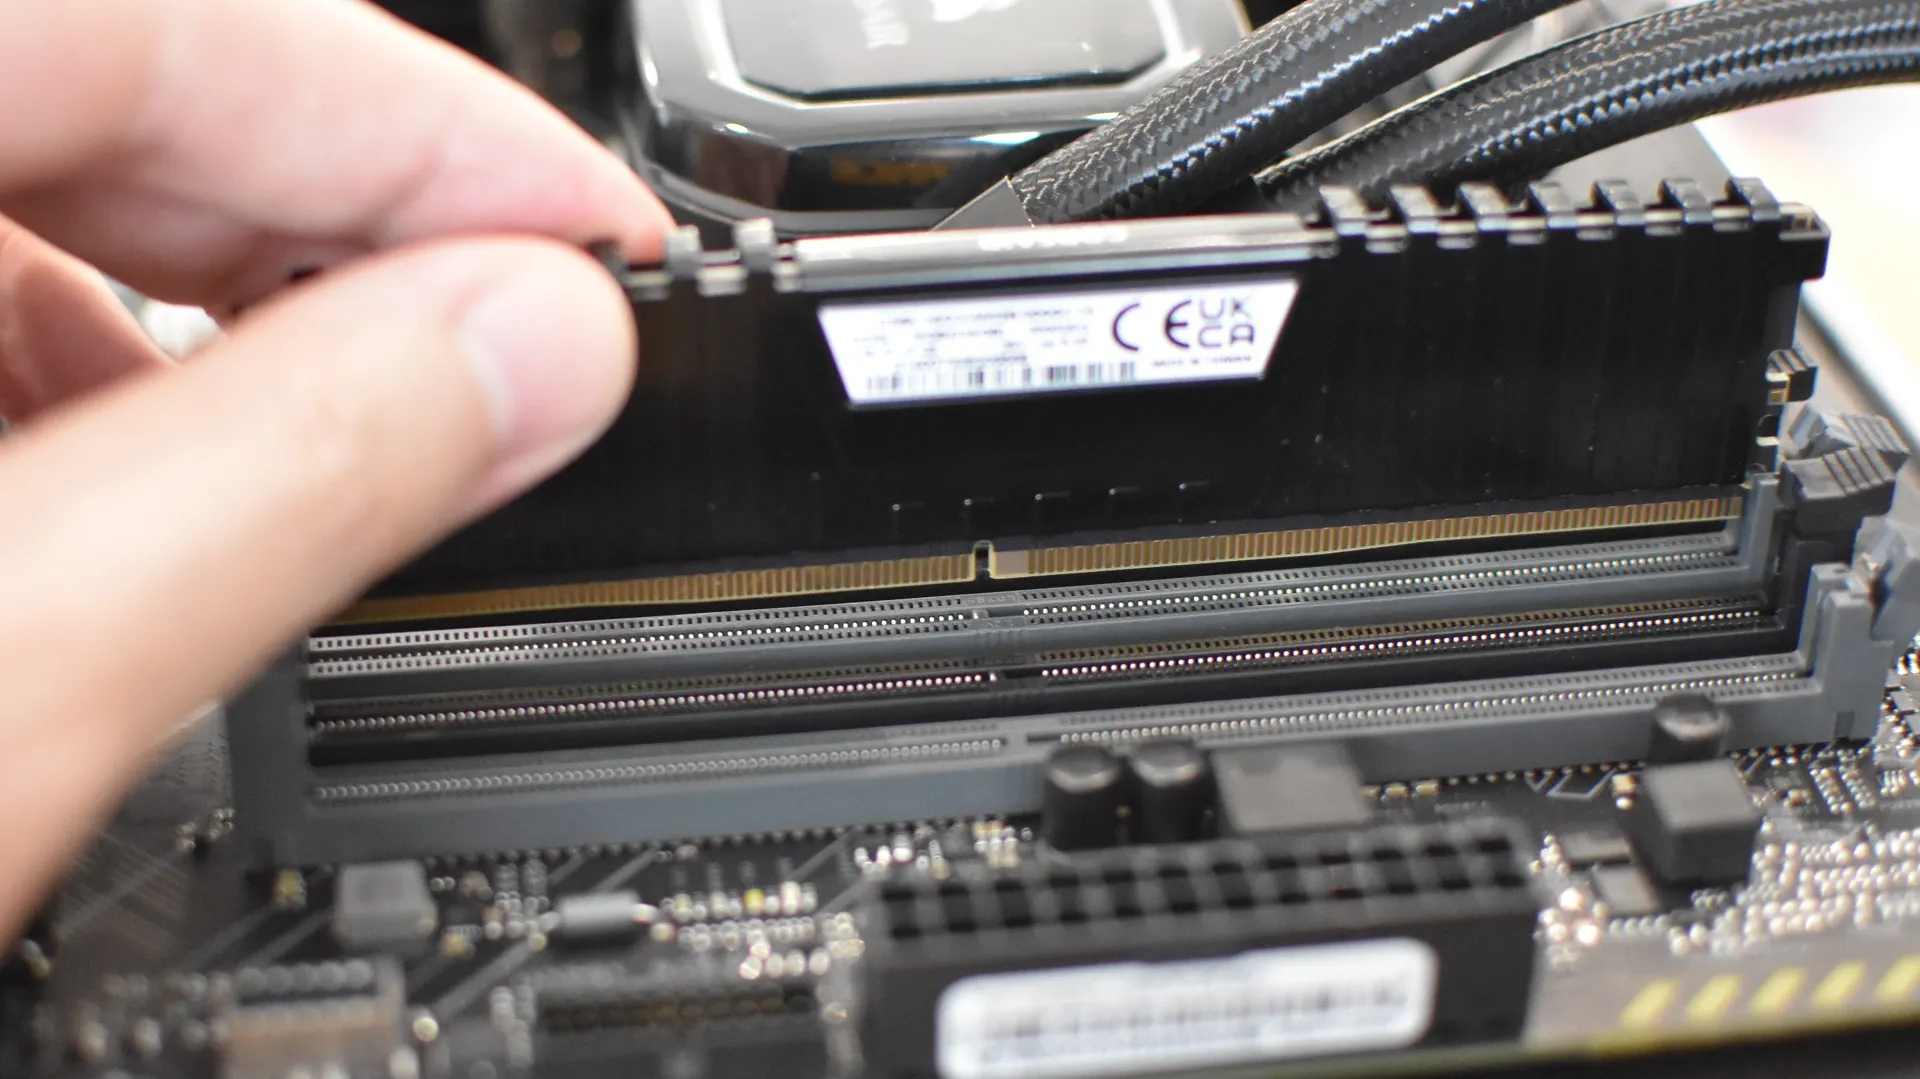 Which Slots Do I Put My RAM In?